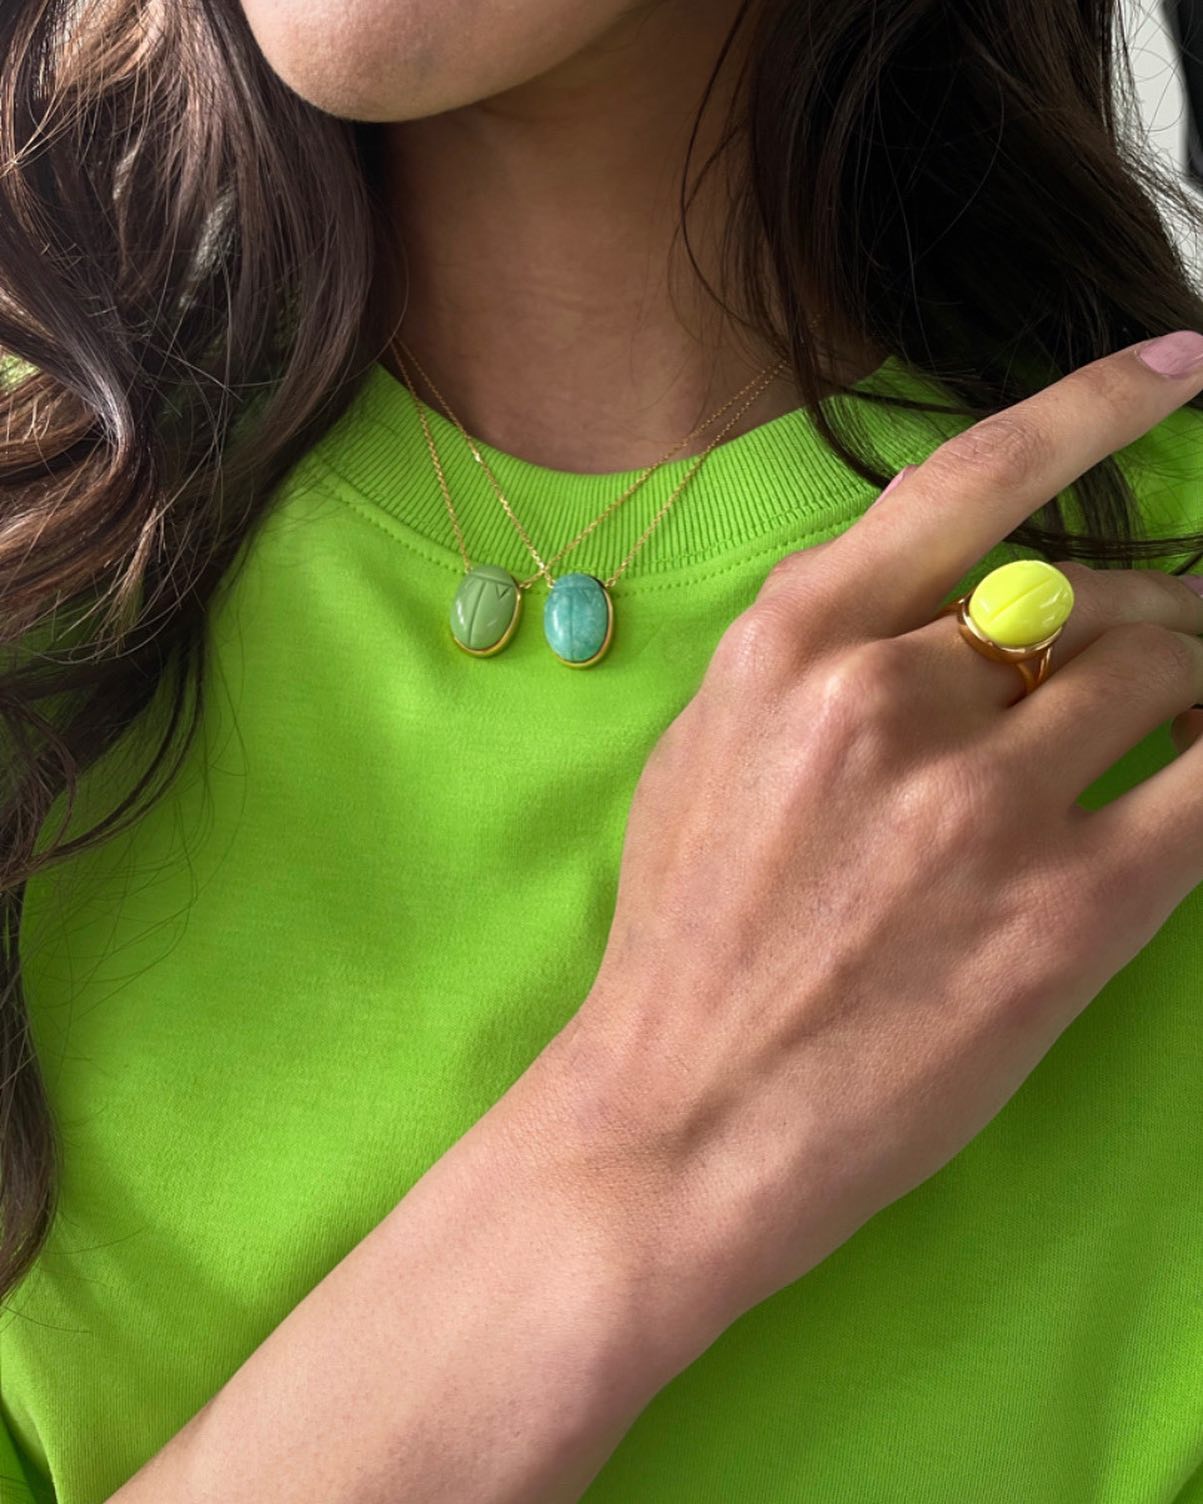 Our colorful Summer Scarabée is now available in store and online #myritazia ❤️🪲
.
.
.
.
.
.
.
#summerjewelry #summervibes #neonjewelry #colorful #neon #jewels #shopping #shoppingonline #genevajewels #genevabrand